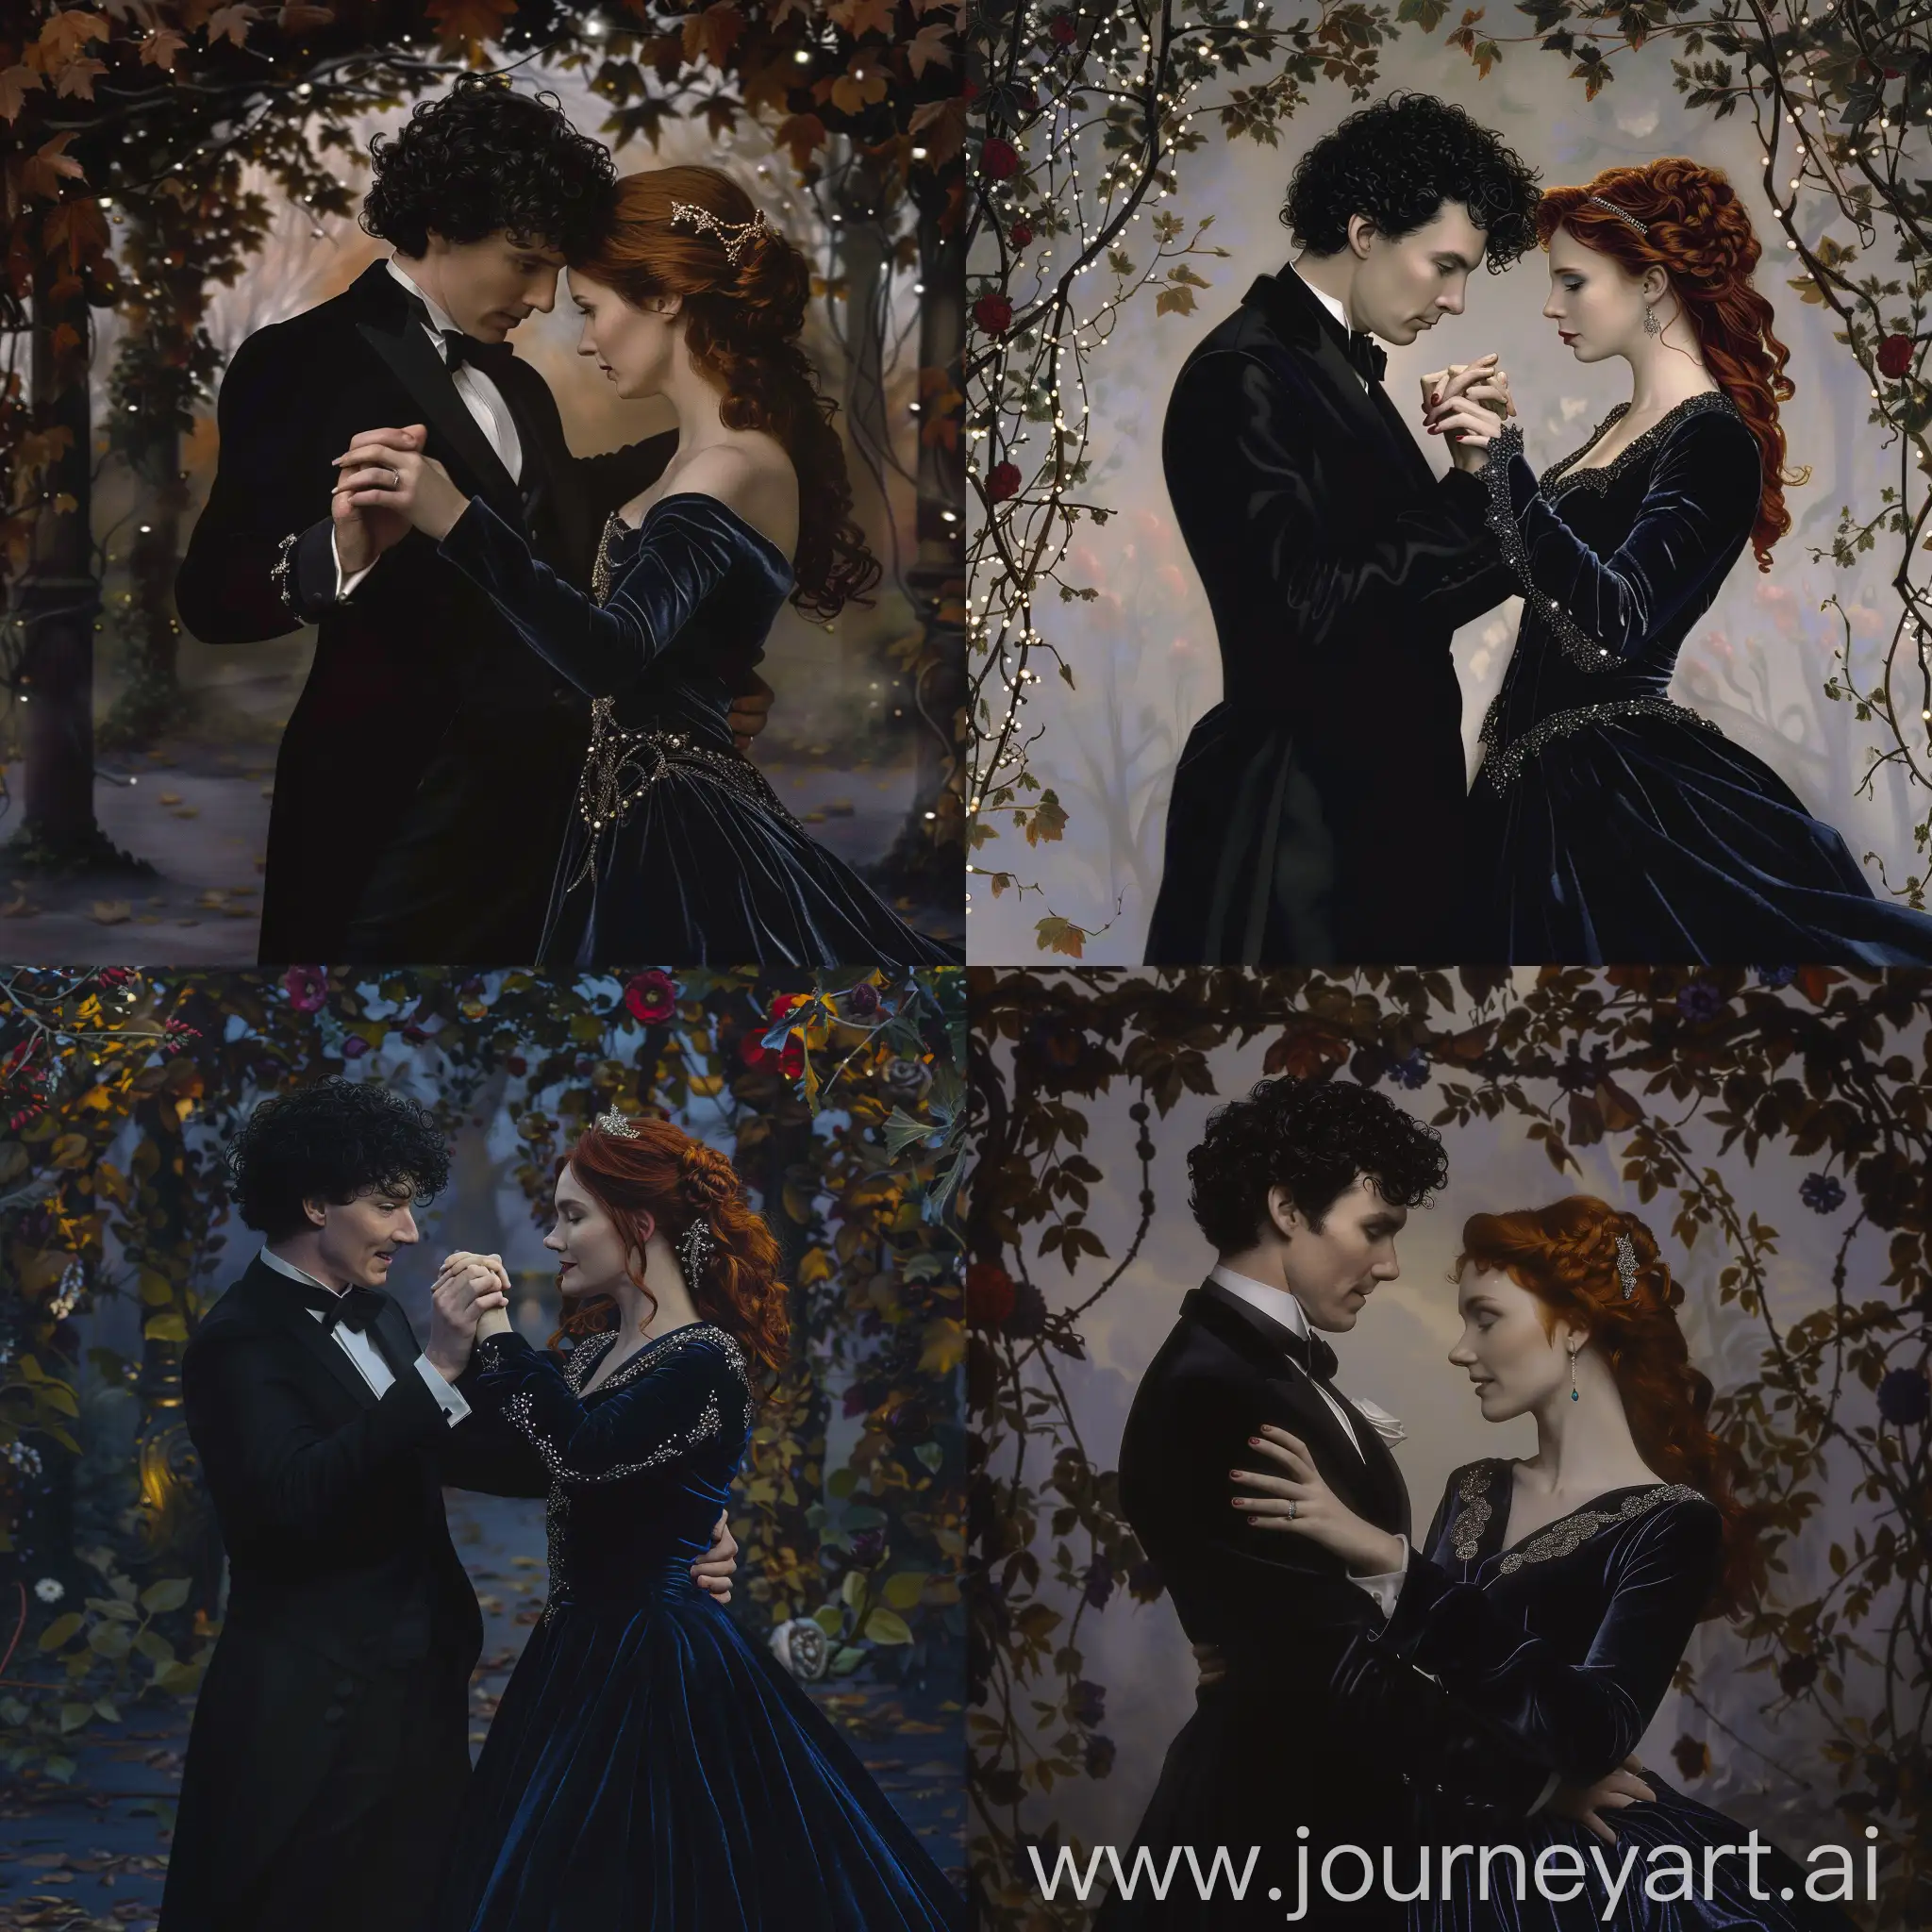 Sherlock-Holmes-and-RedHaired-Woman-Waltzing-in-Evening-Park